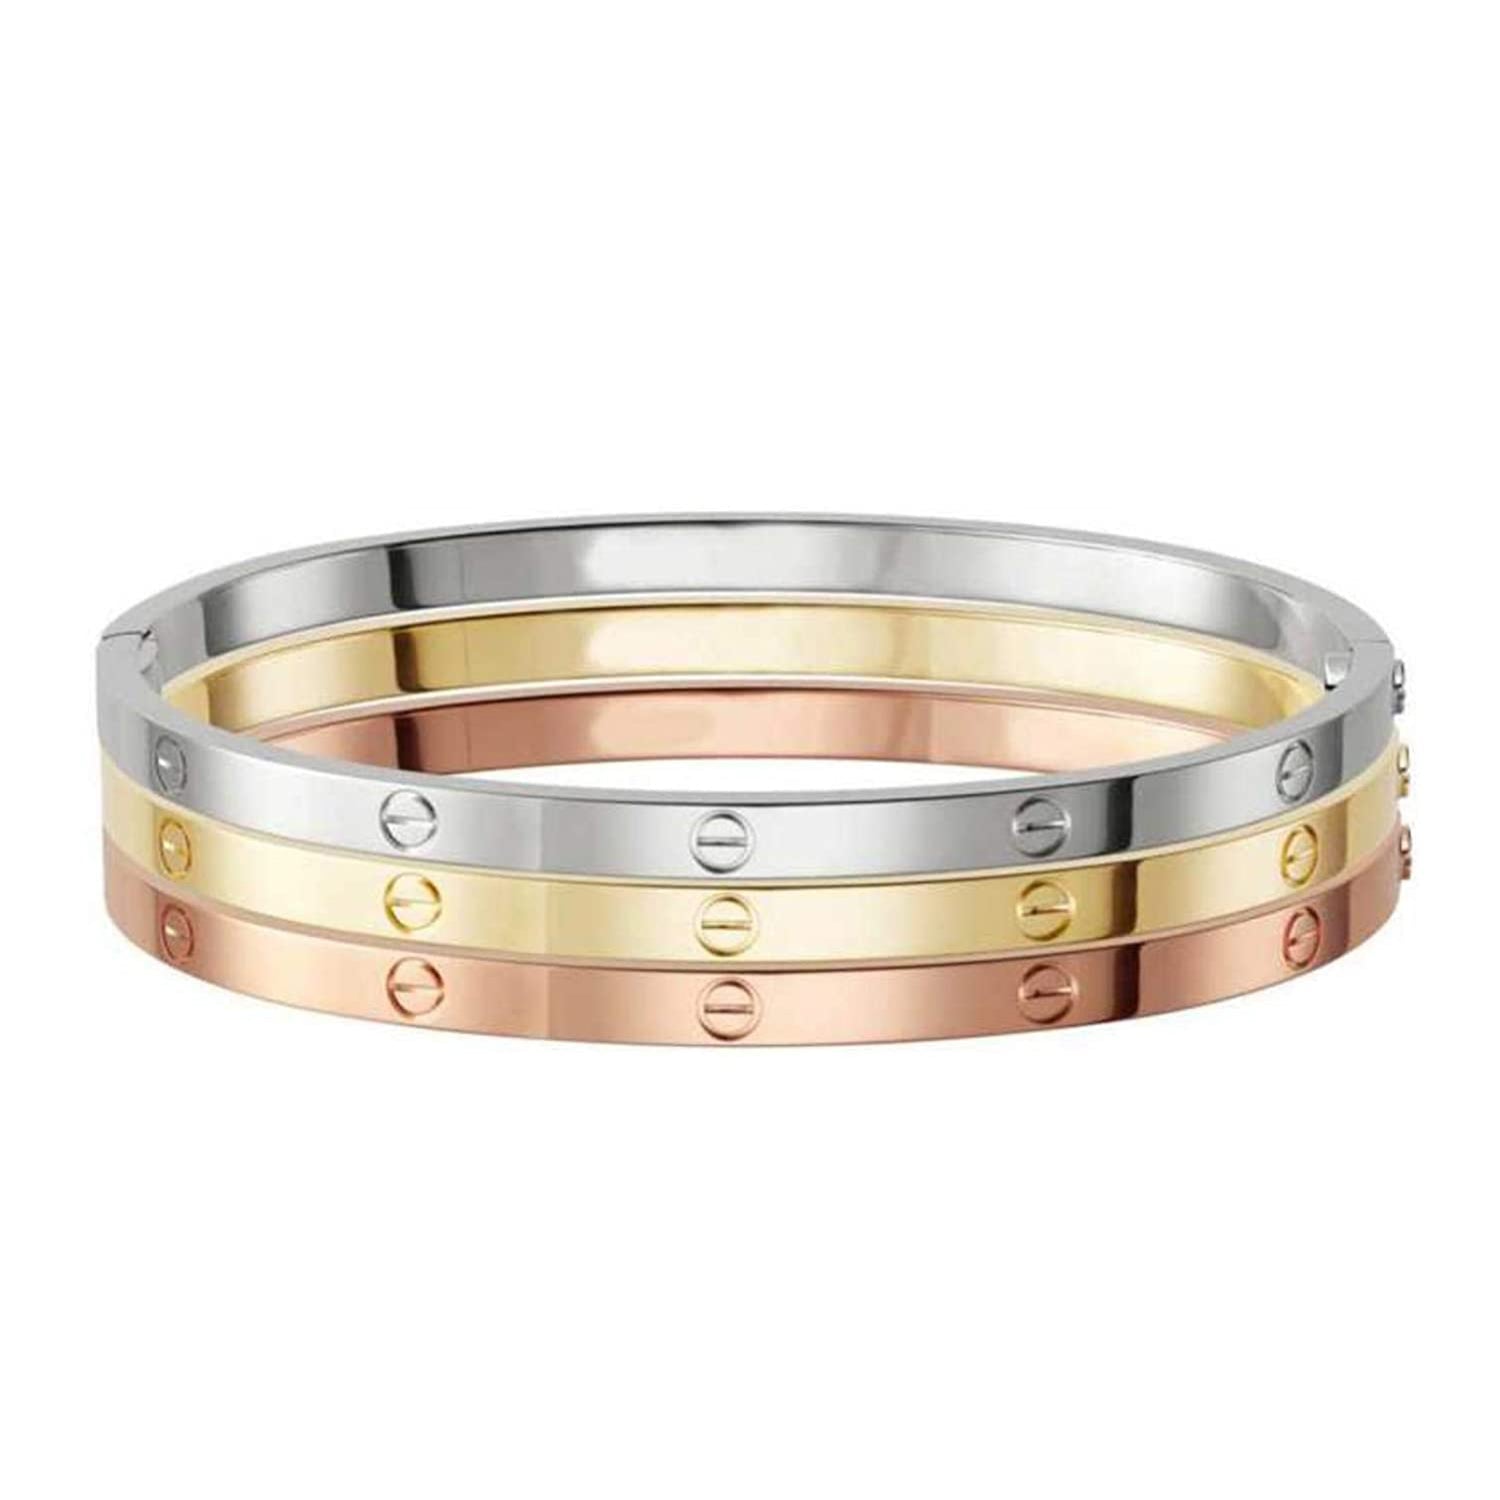 Buy Stainless Steel Gold Plated Love Bracelet For Women & Girls (Gold, 2'4)  at Amazon.in